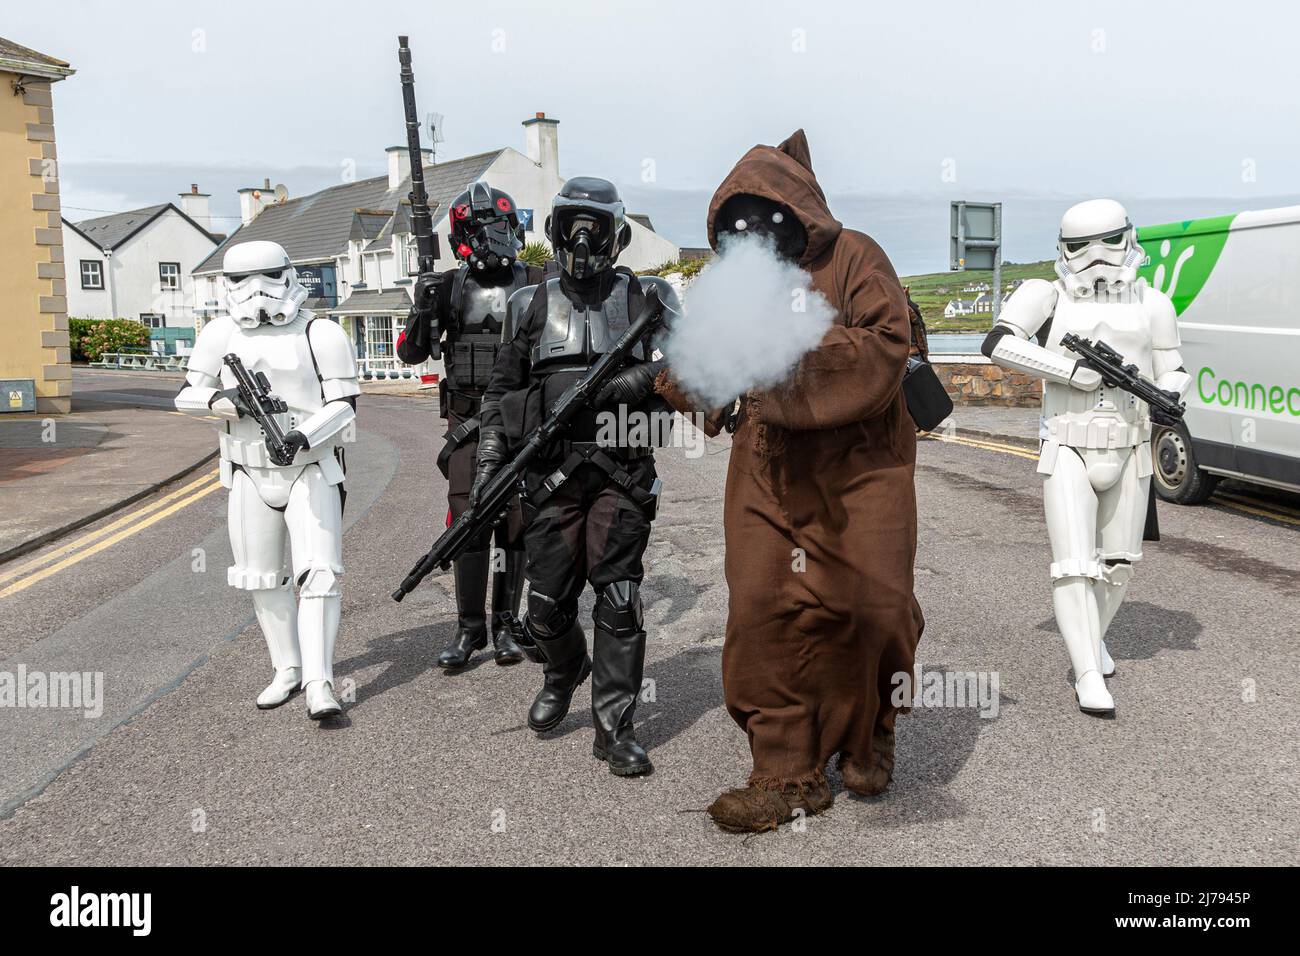 Star Wars-Charaktere beim Festival 4. in Portmagee, County Kerry, Irland Stockfoto